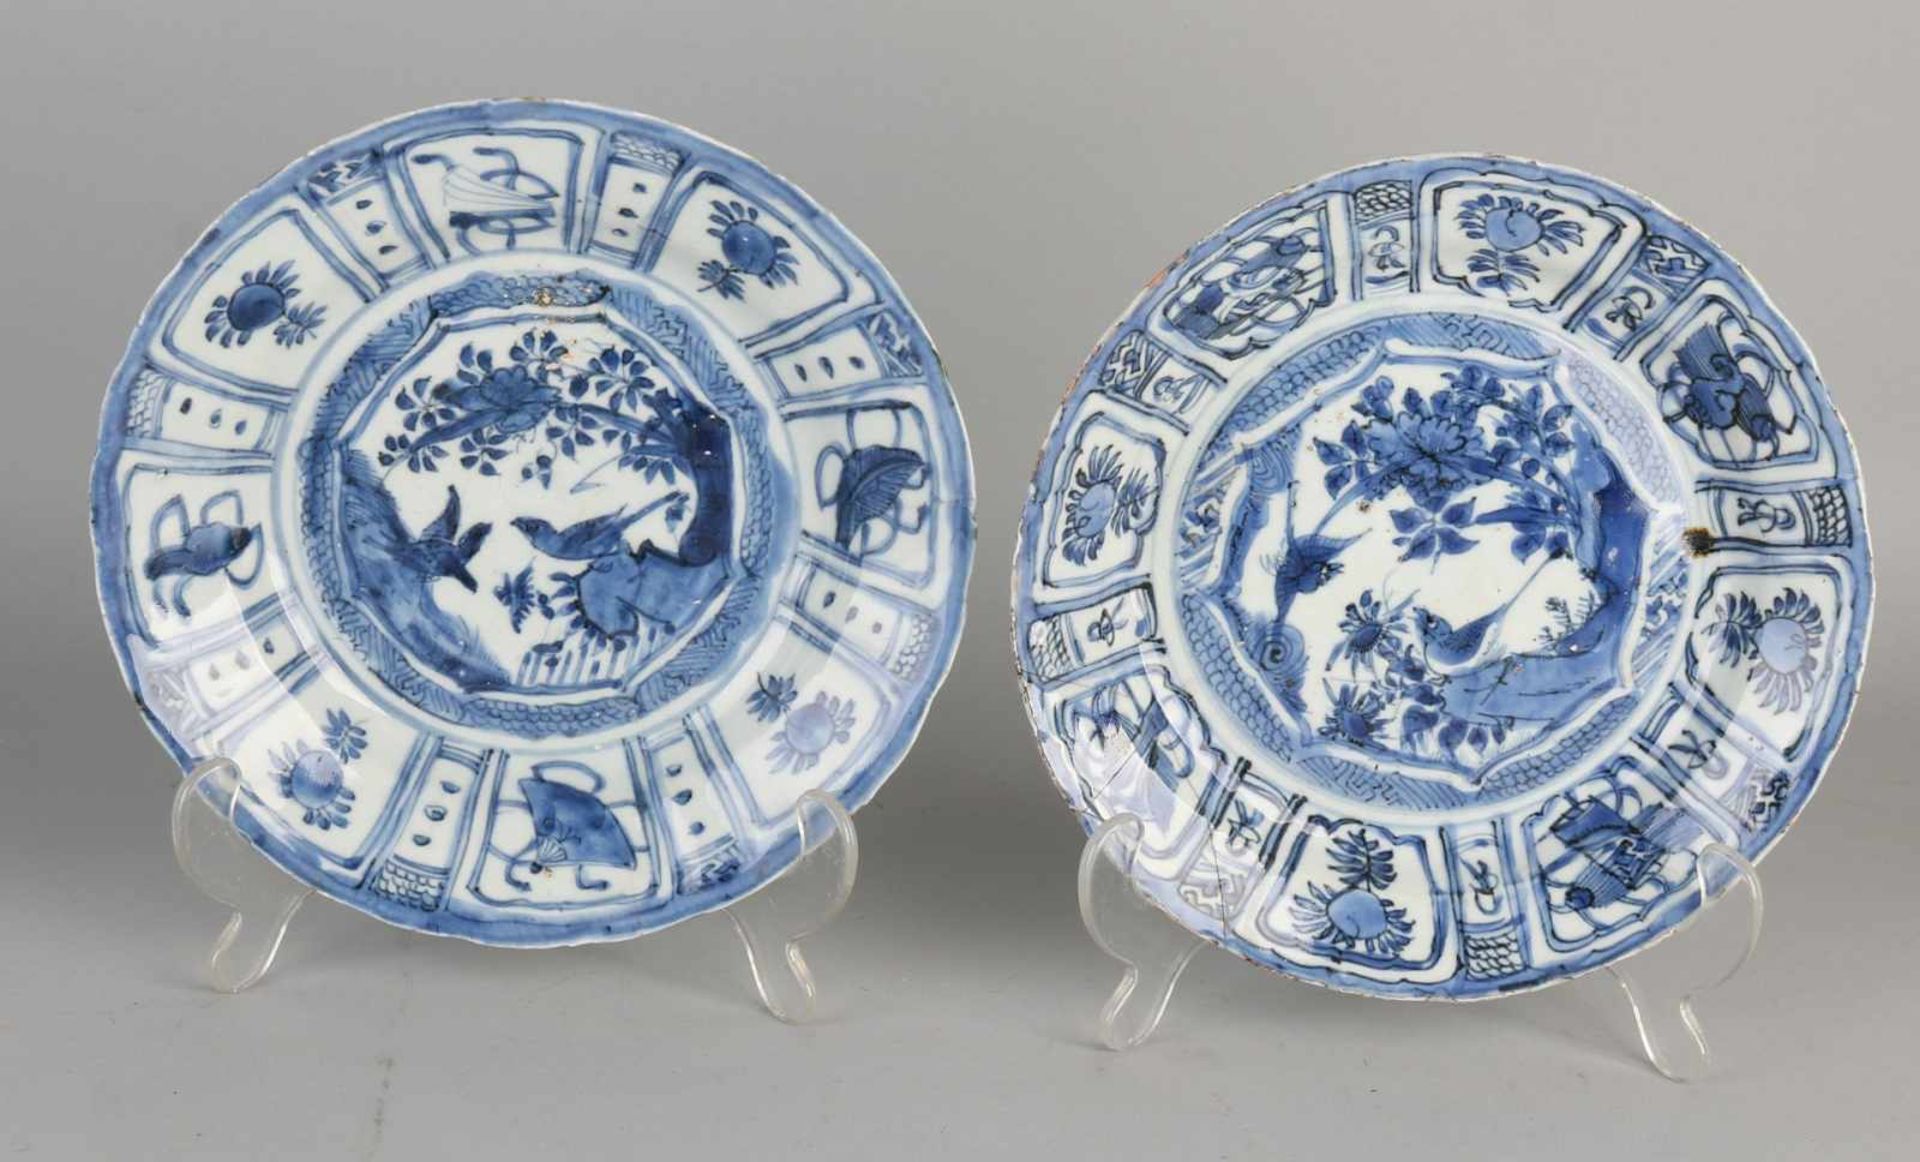 Two 17th century Chinese porcelain plates Wanli. Both damaged. Size: Ø 21 - 21.5 cm. In reasonable